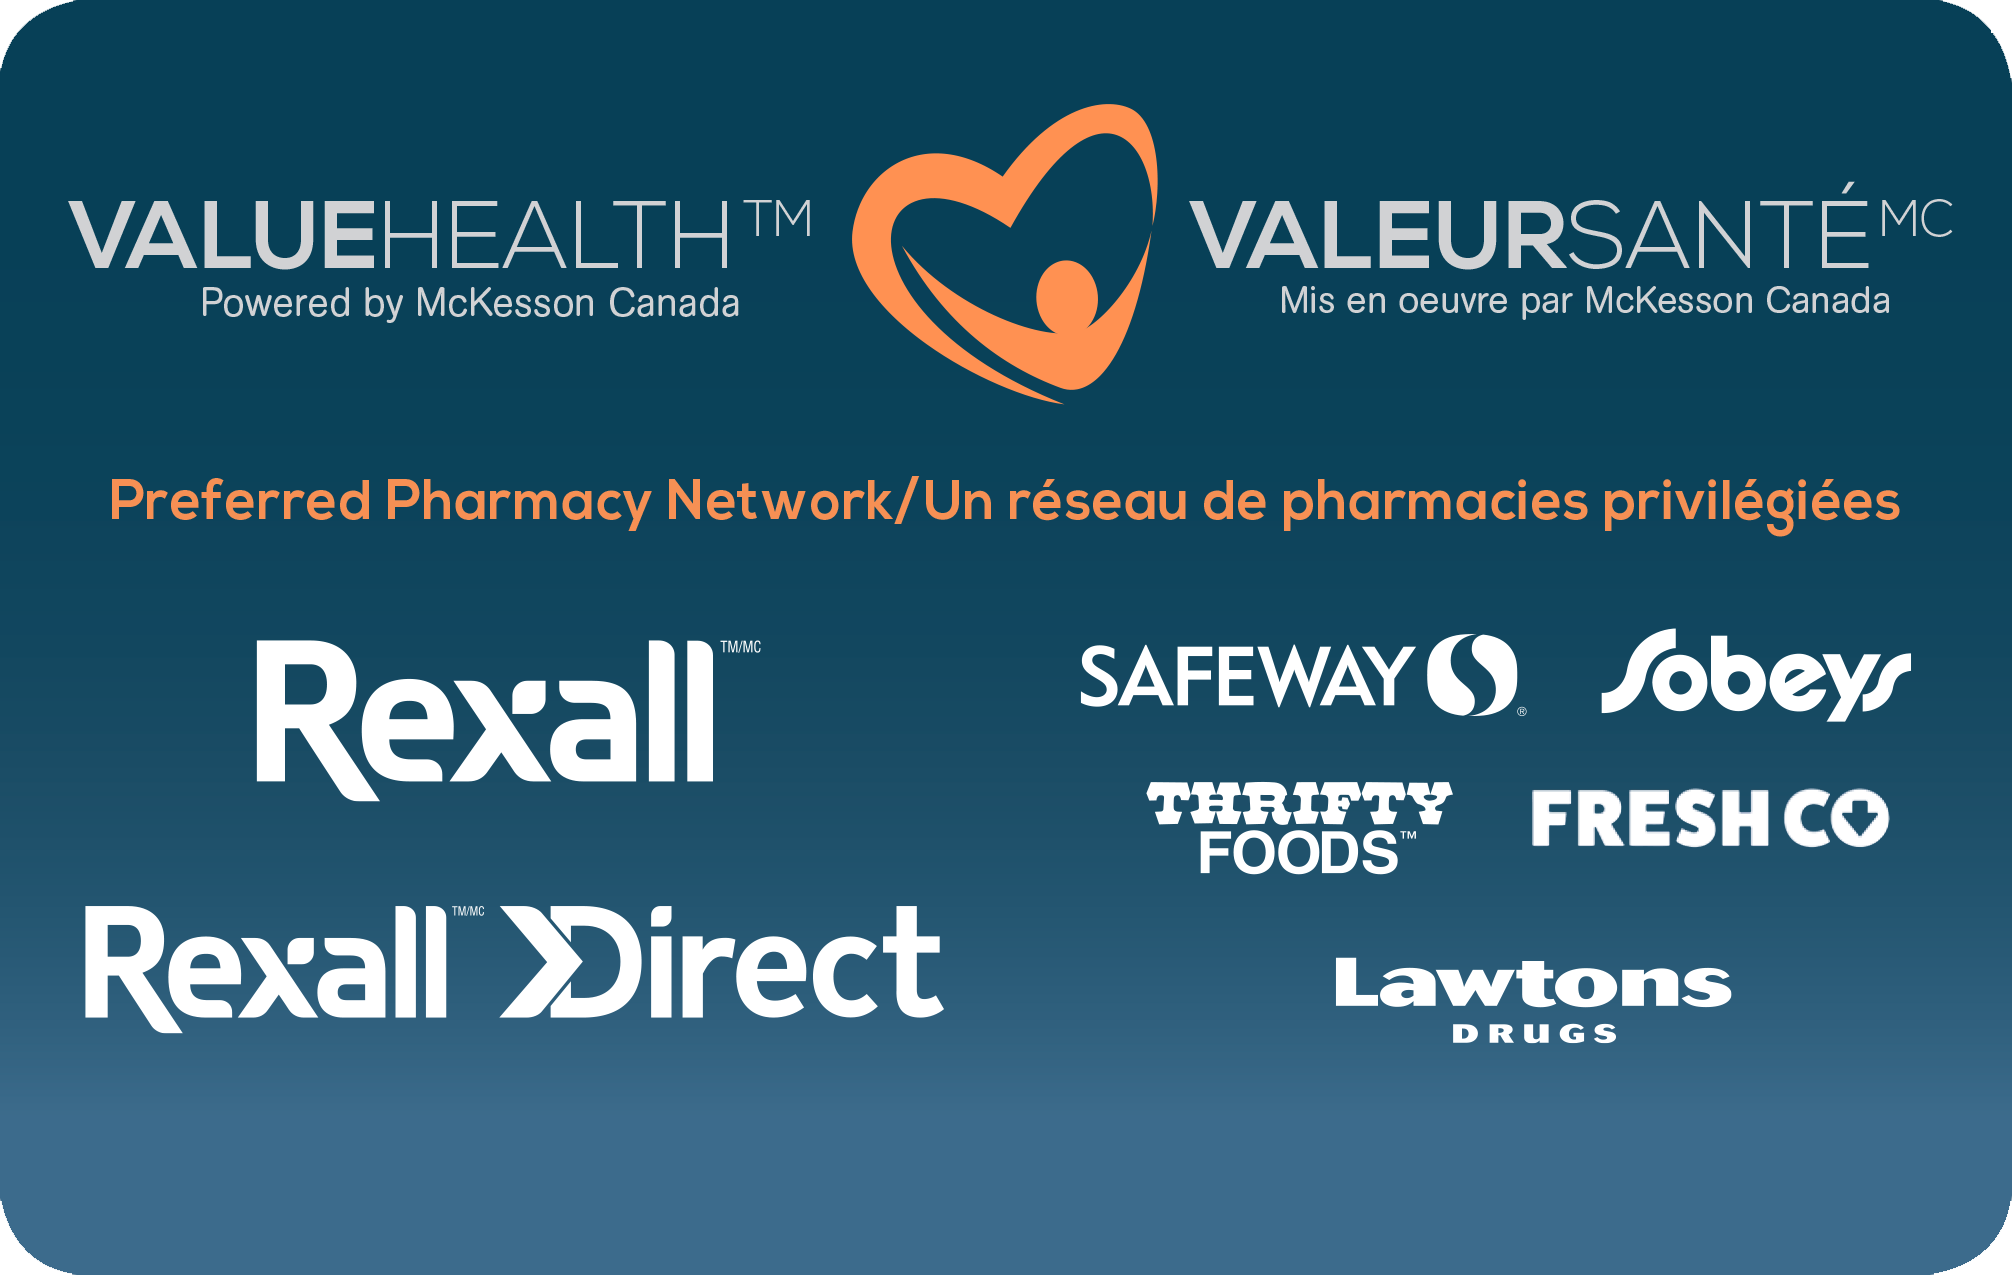 ValueHealth branded discount card on in-store private label everyday items, exclusively for ValueHealth members